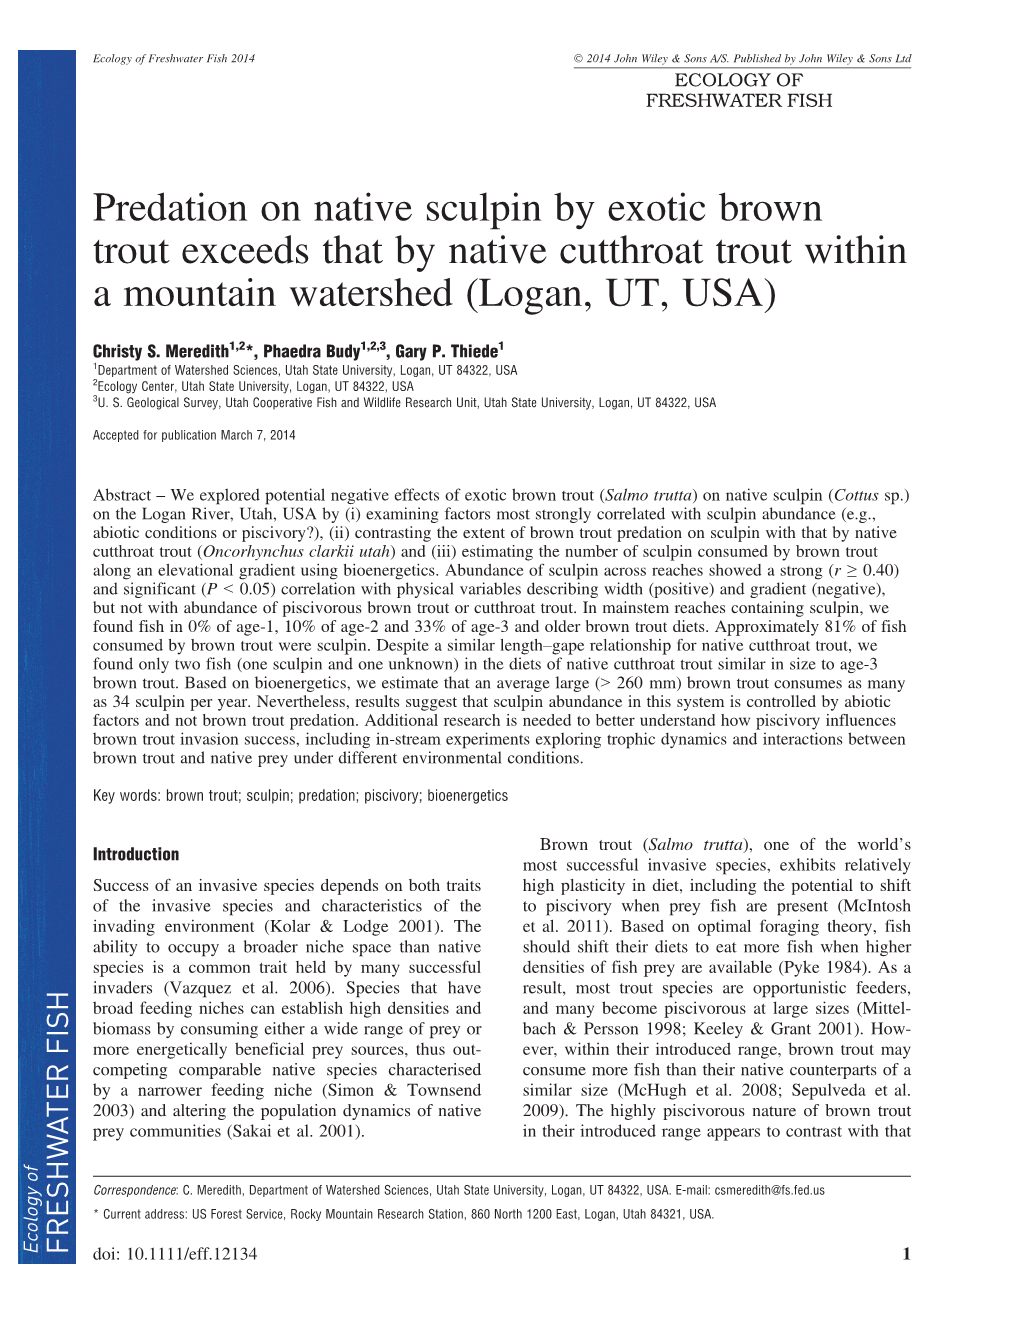 Predation on Native Sculpin by Exotic Brown Trout Exceeds That by Native Cutthroat Trout Within a Mountain Watershed (Logan, UT, USA)